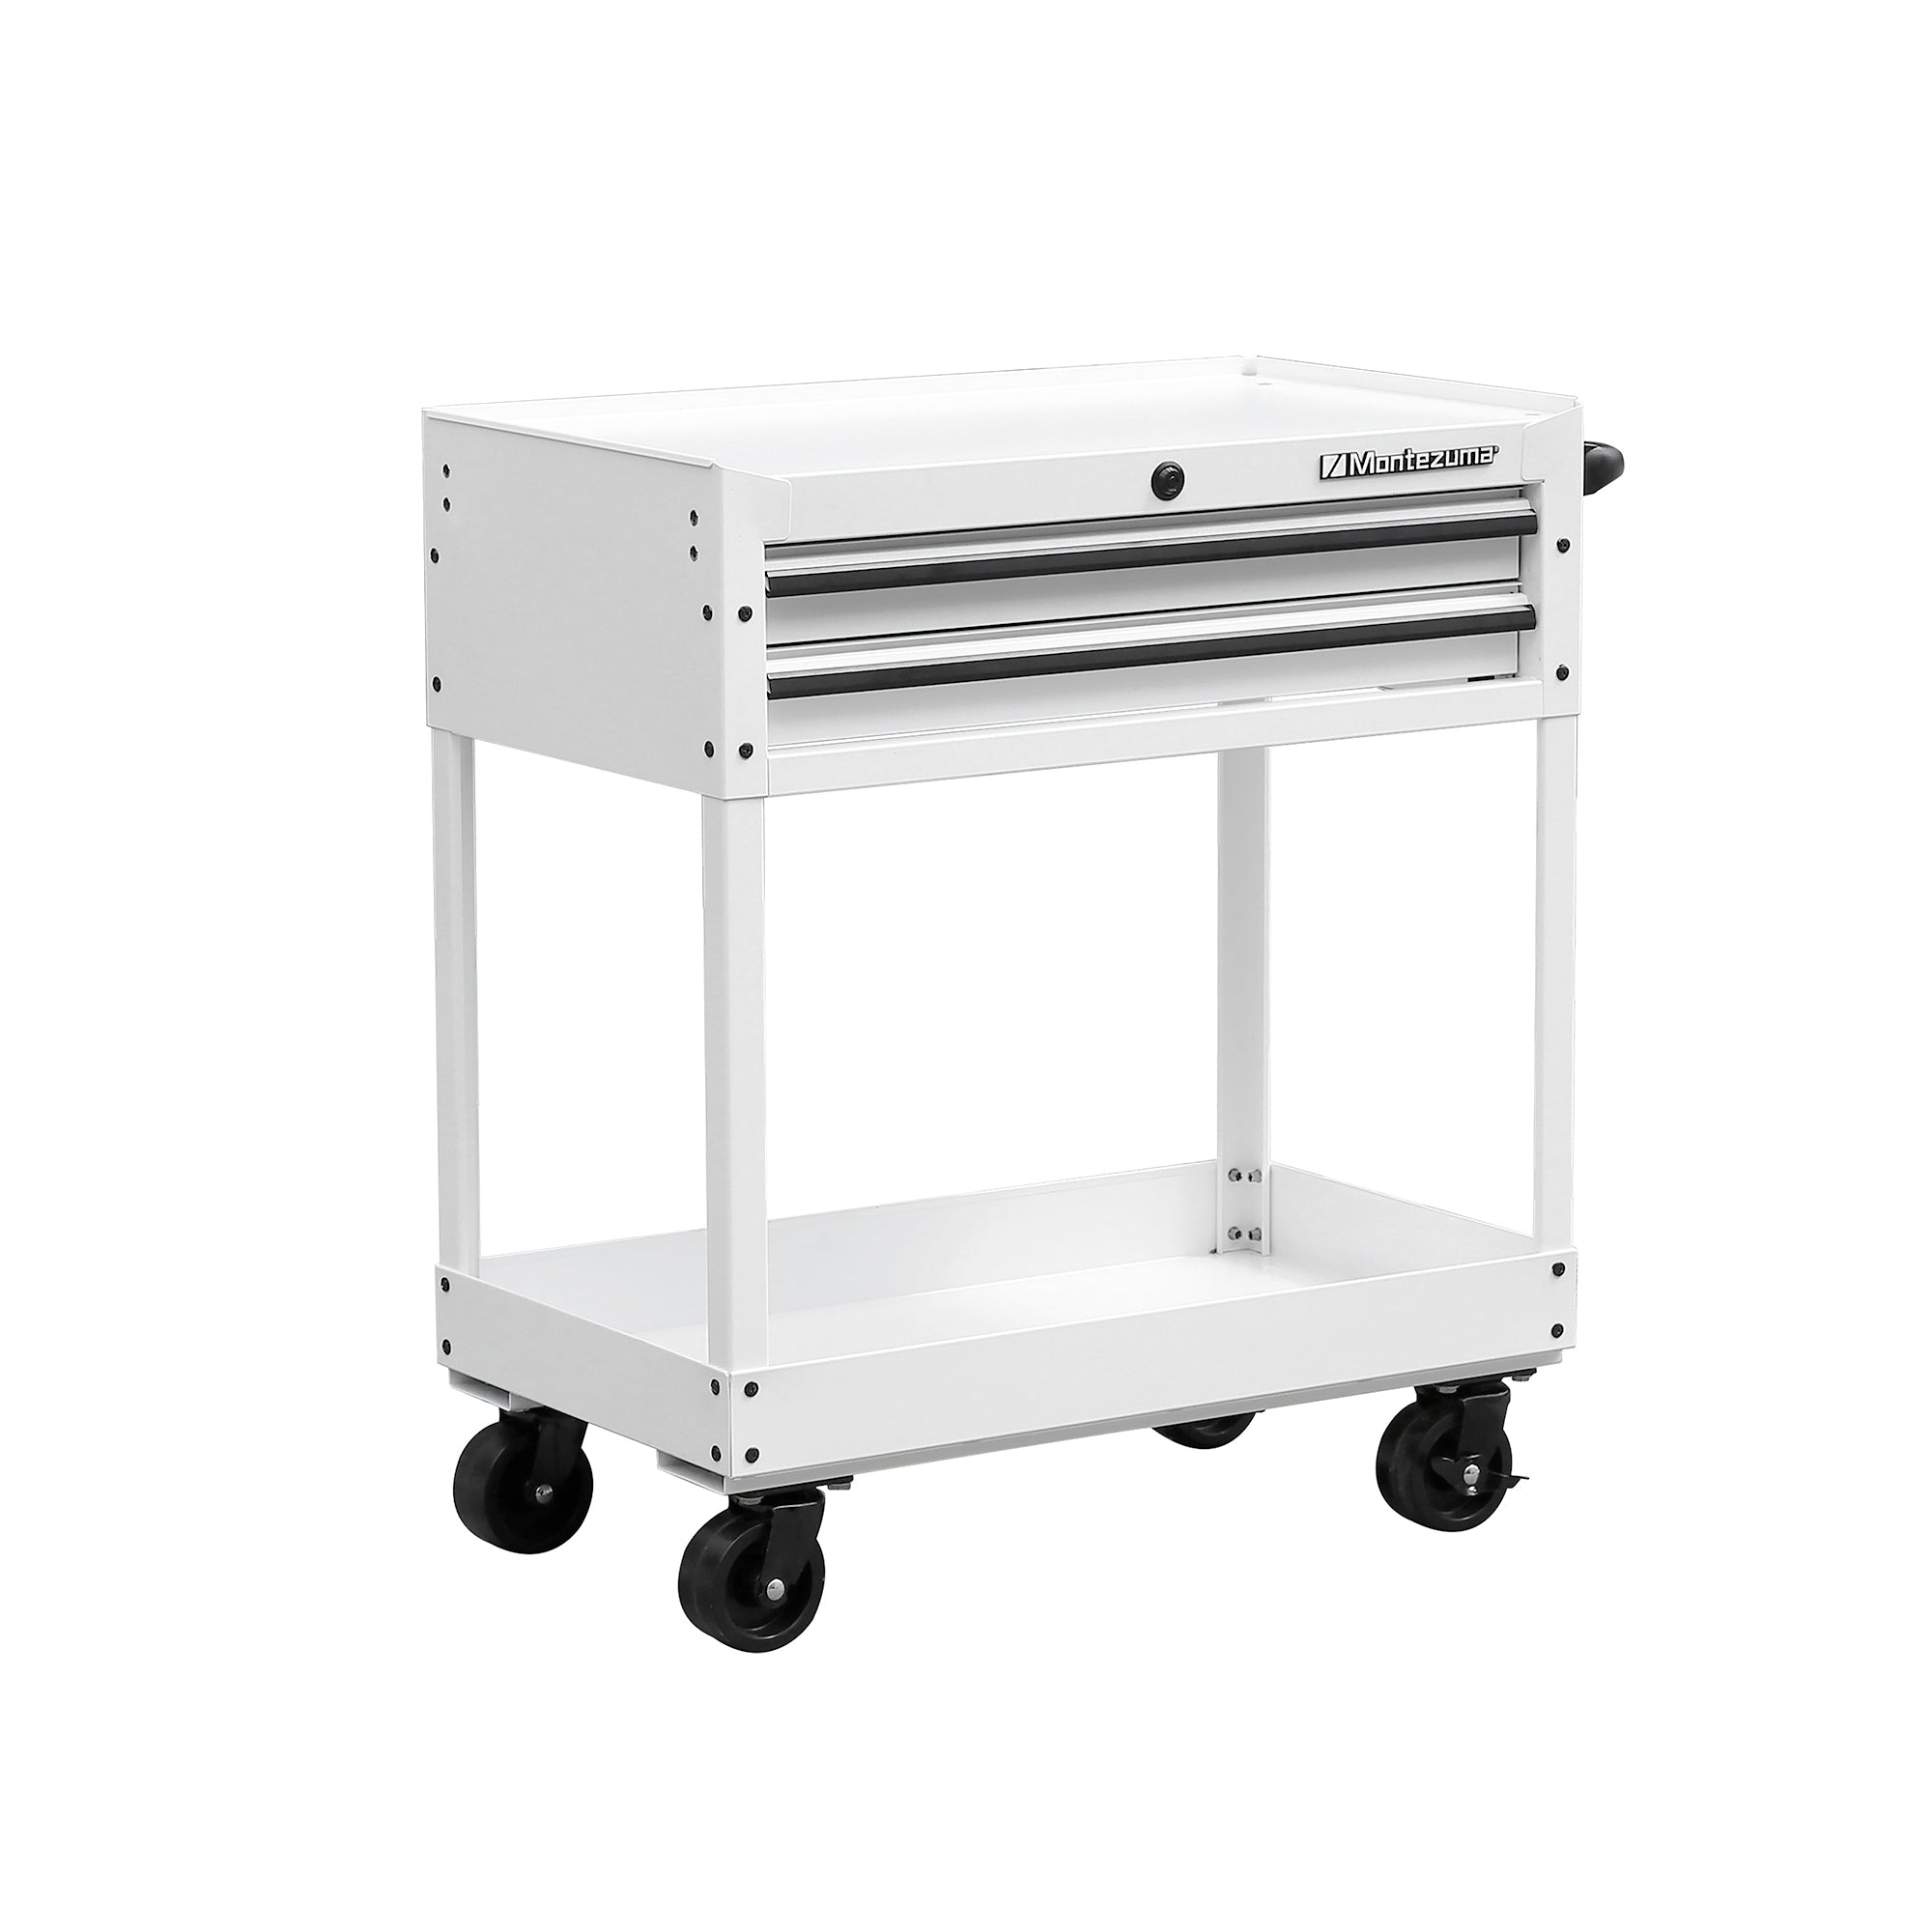 Harbor Freight US General Tool Cart has New Color Options